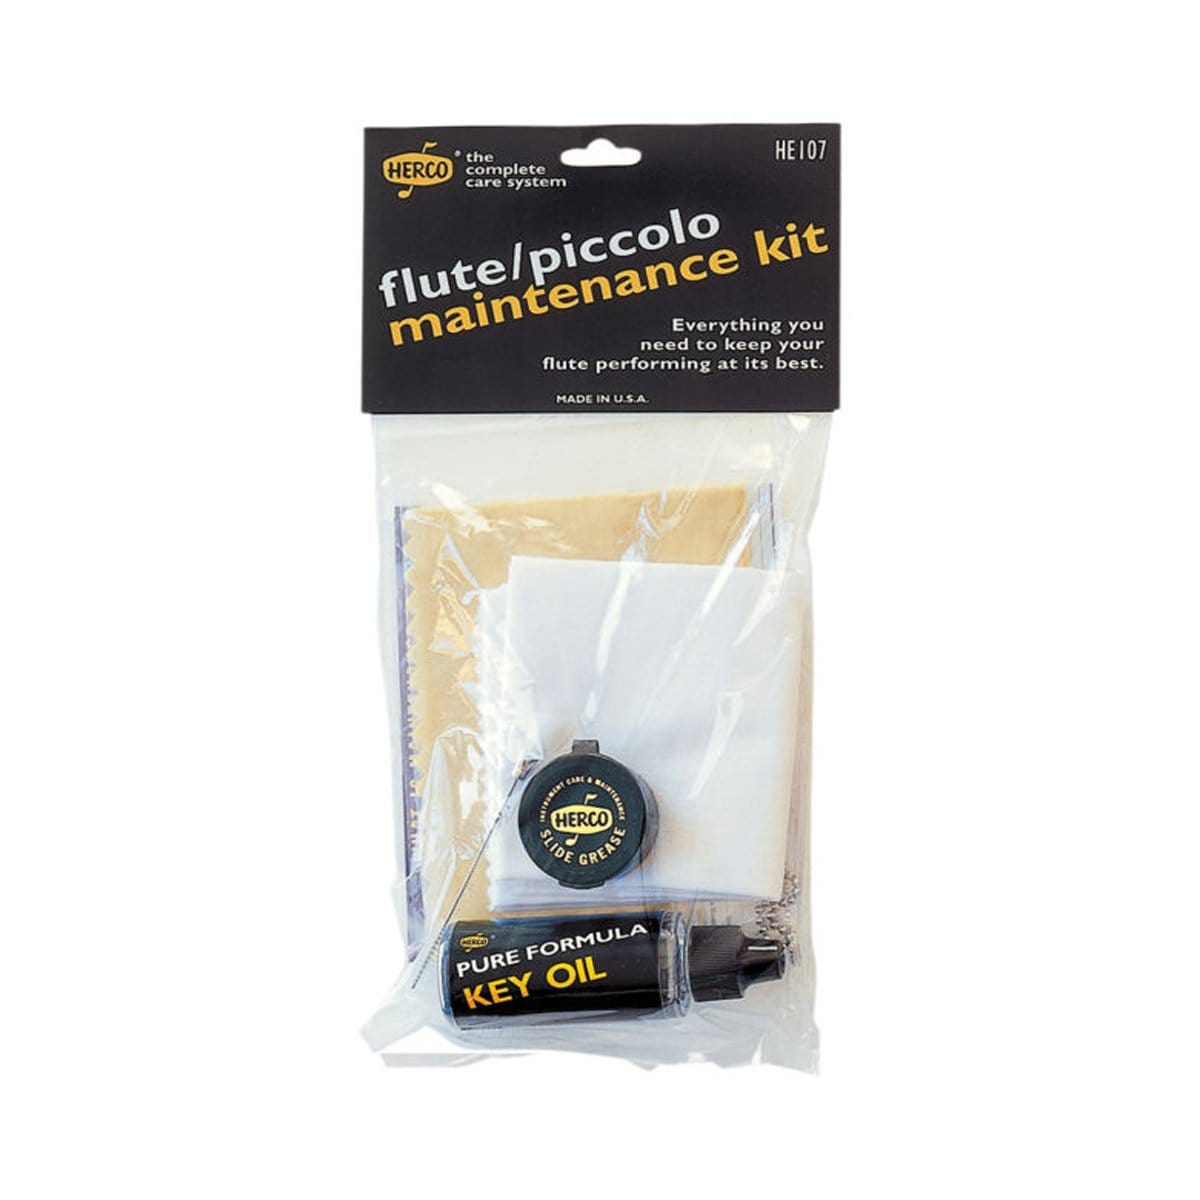 Herco Orchestral Herco HE107 Flute Maintenance Kit - Byron Music